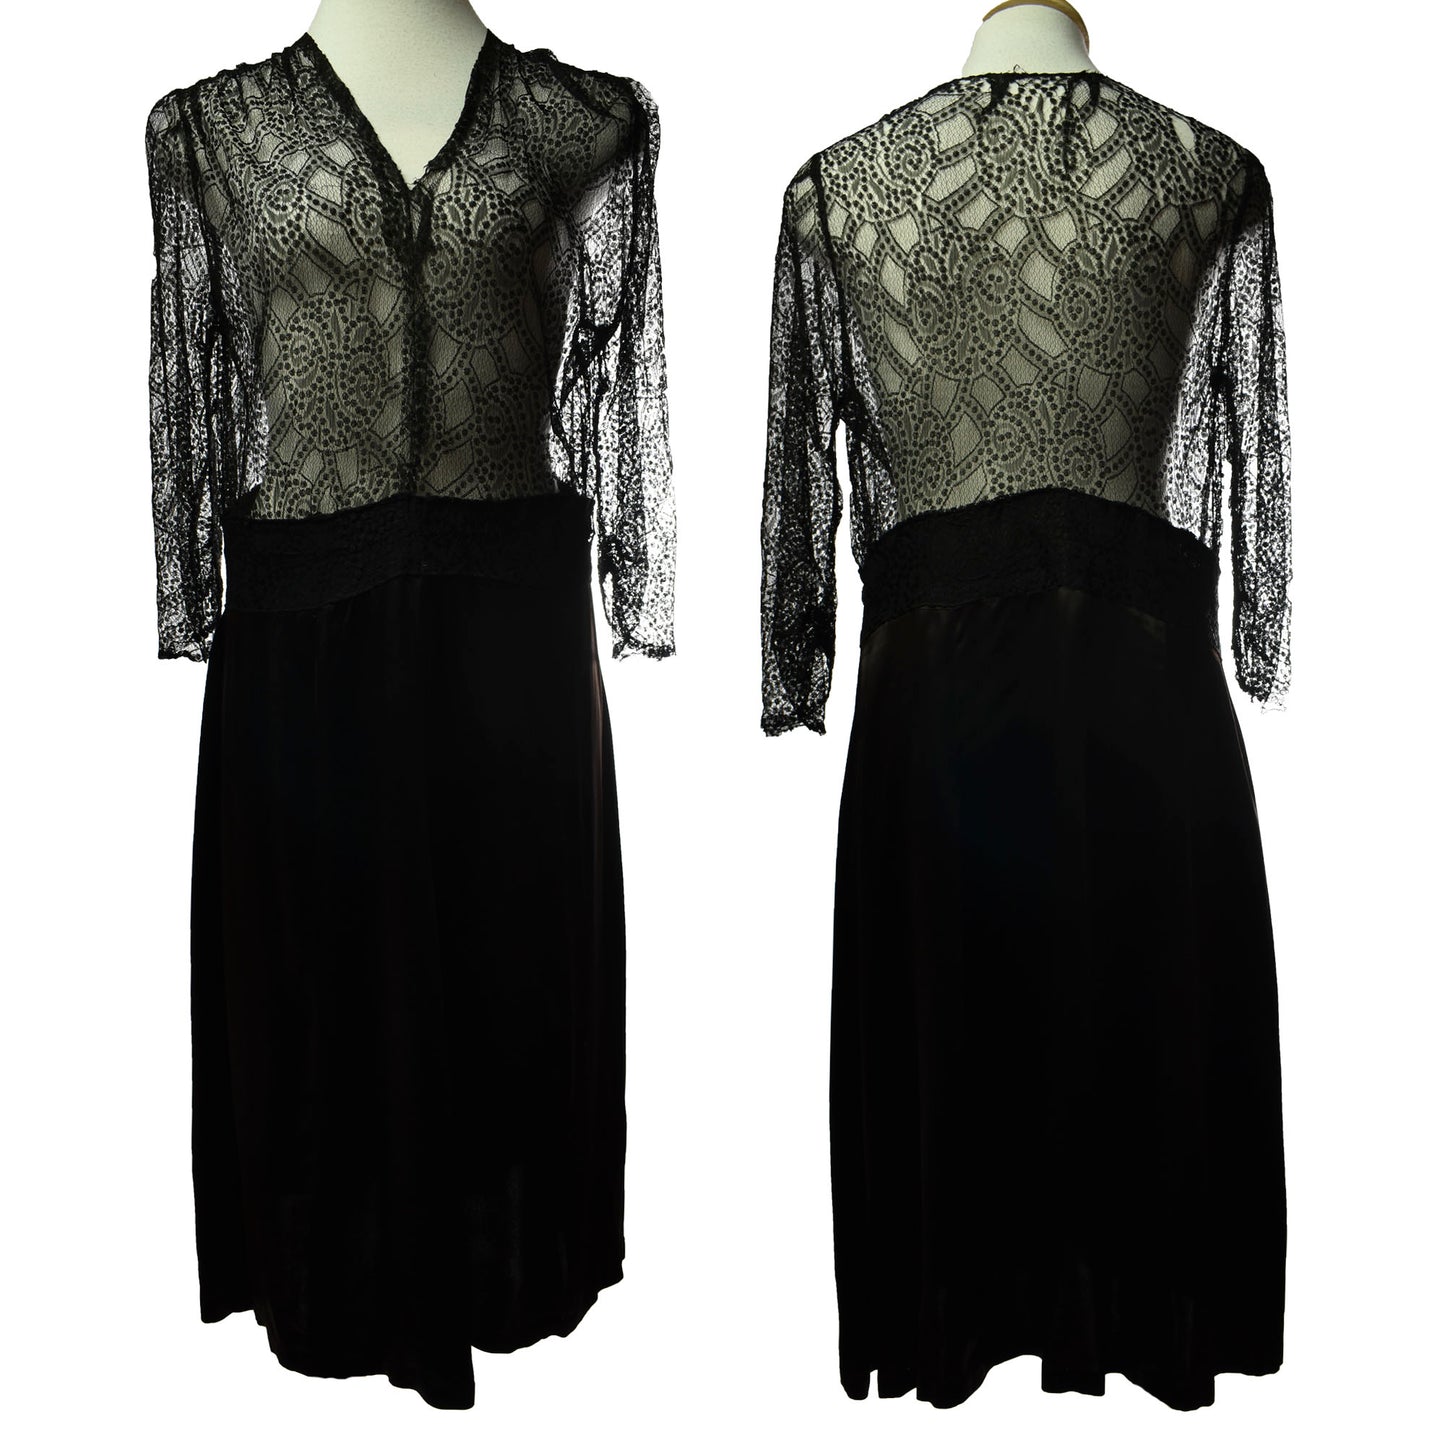 Vintage 30s Hand Made Black Liquid Lace and Satin Dress